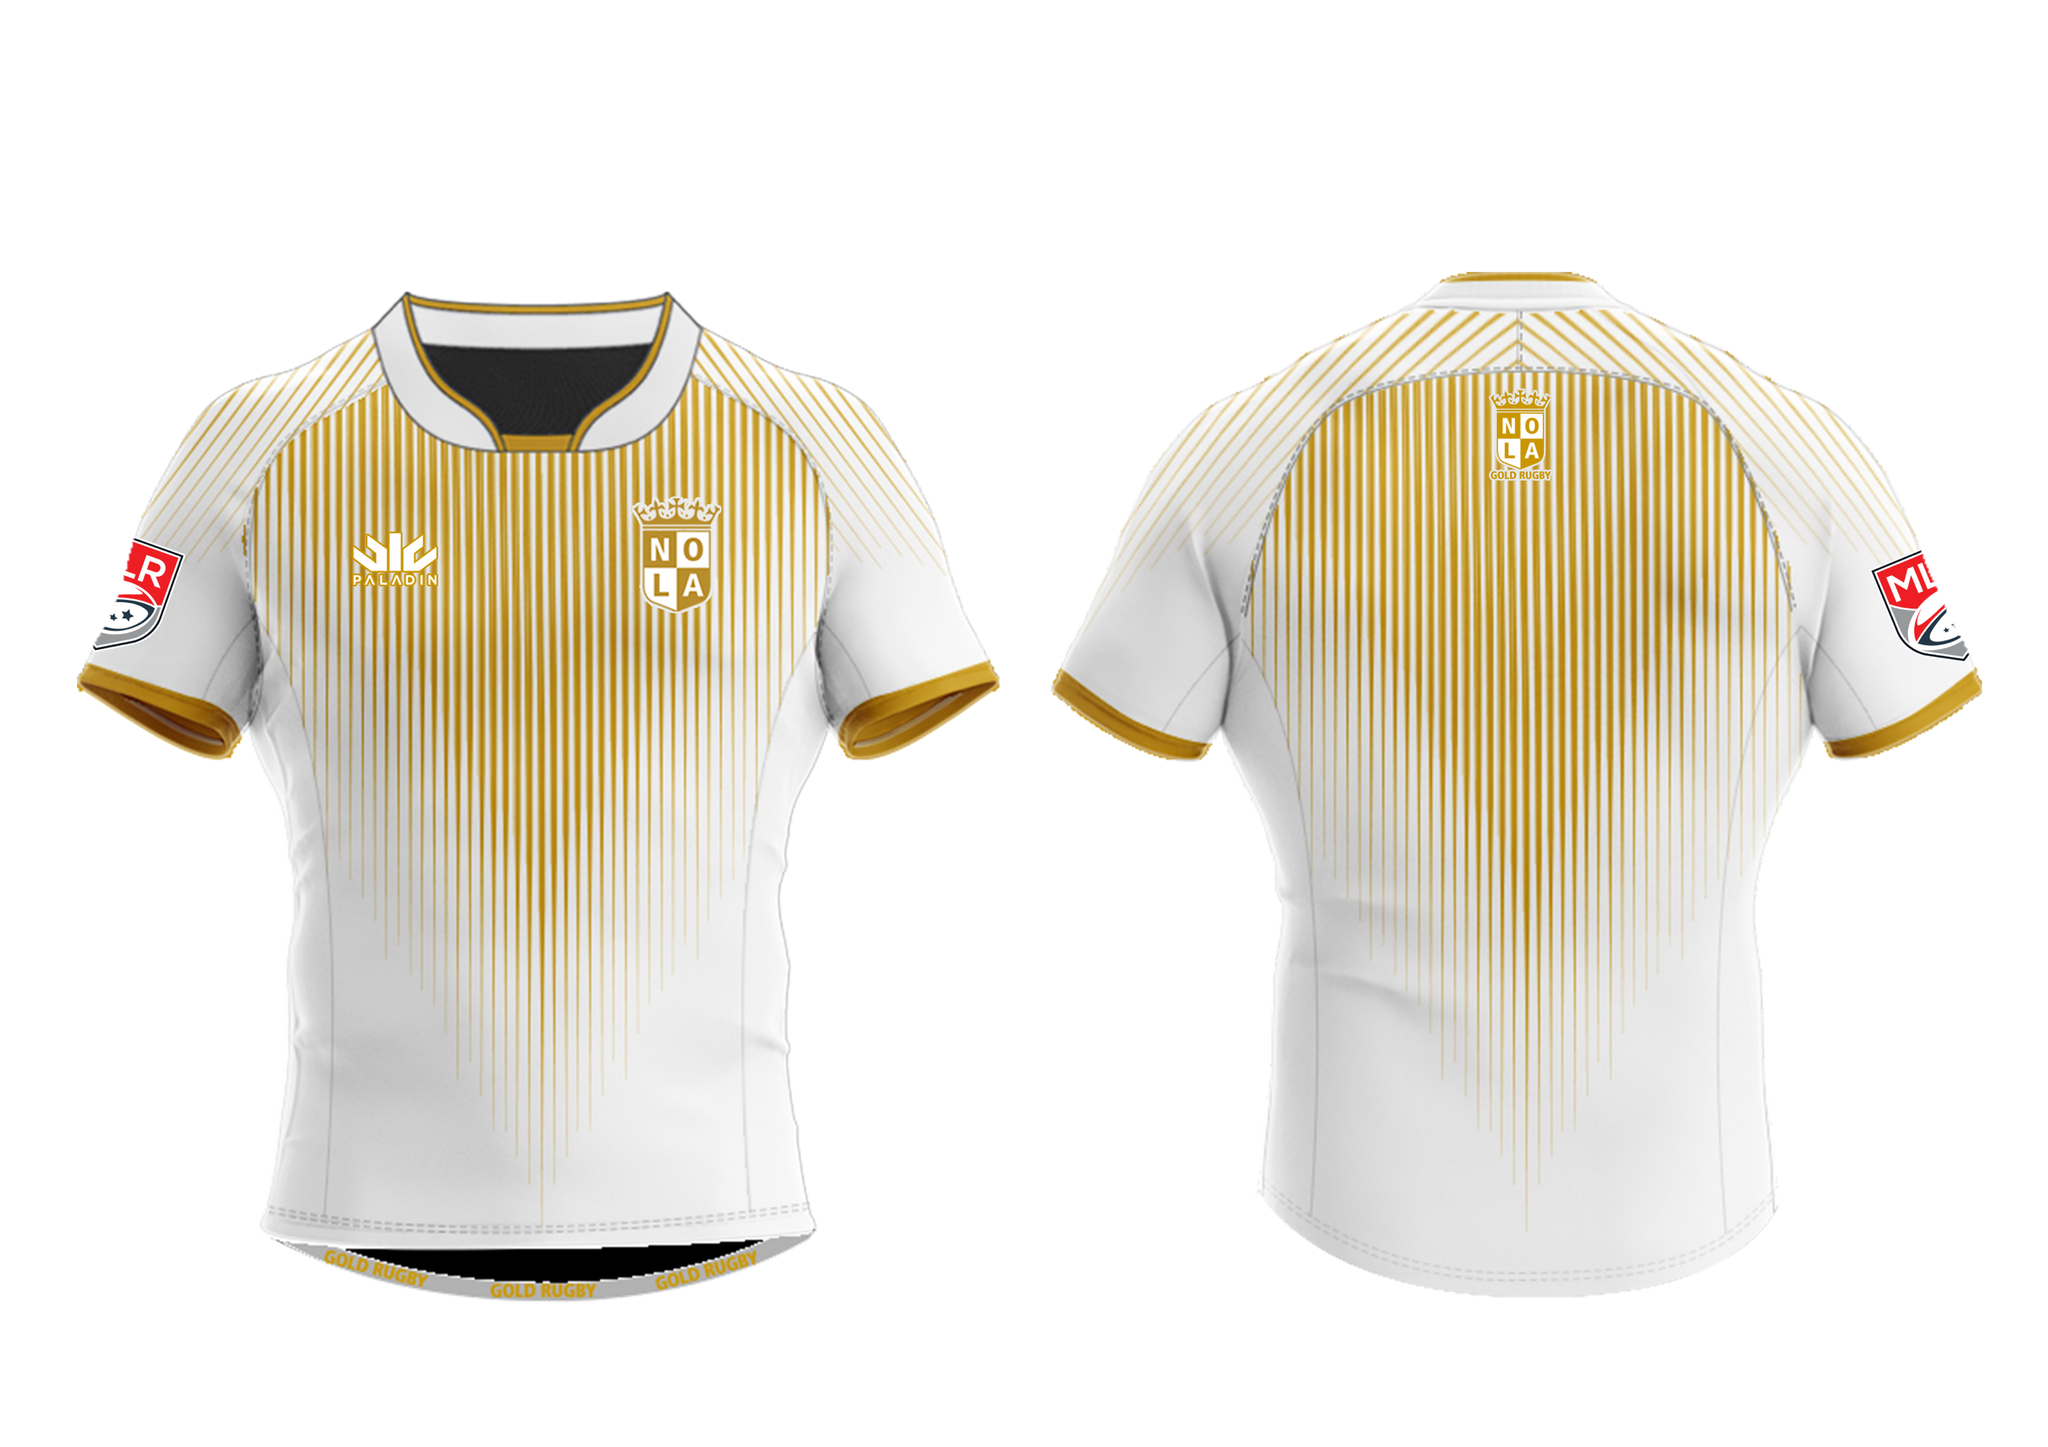 nola gold rugby jersey